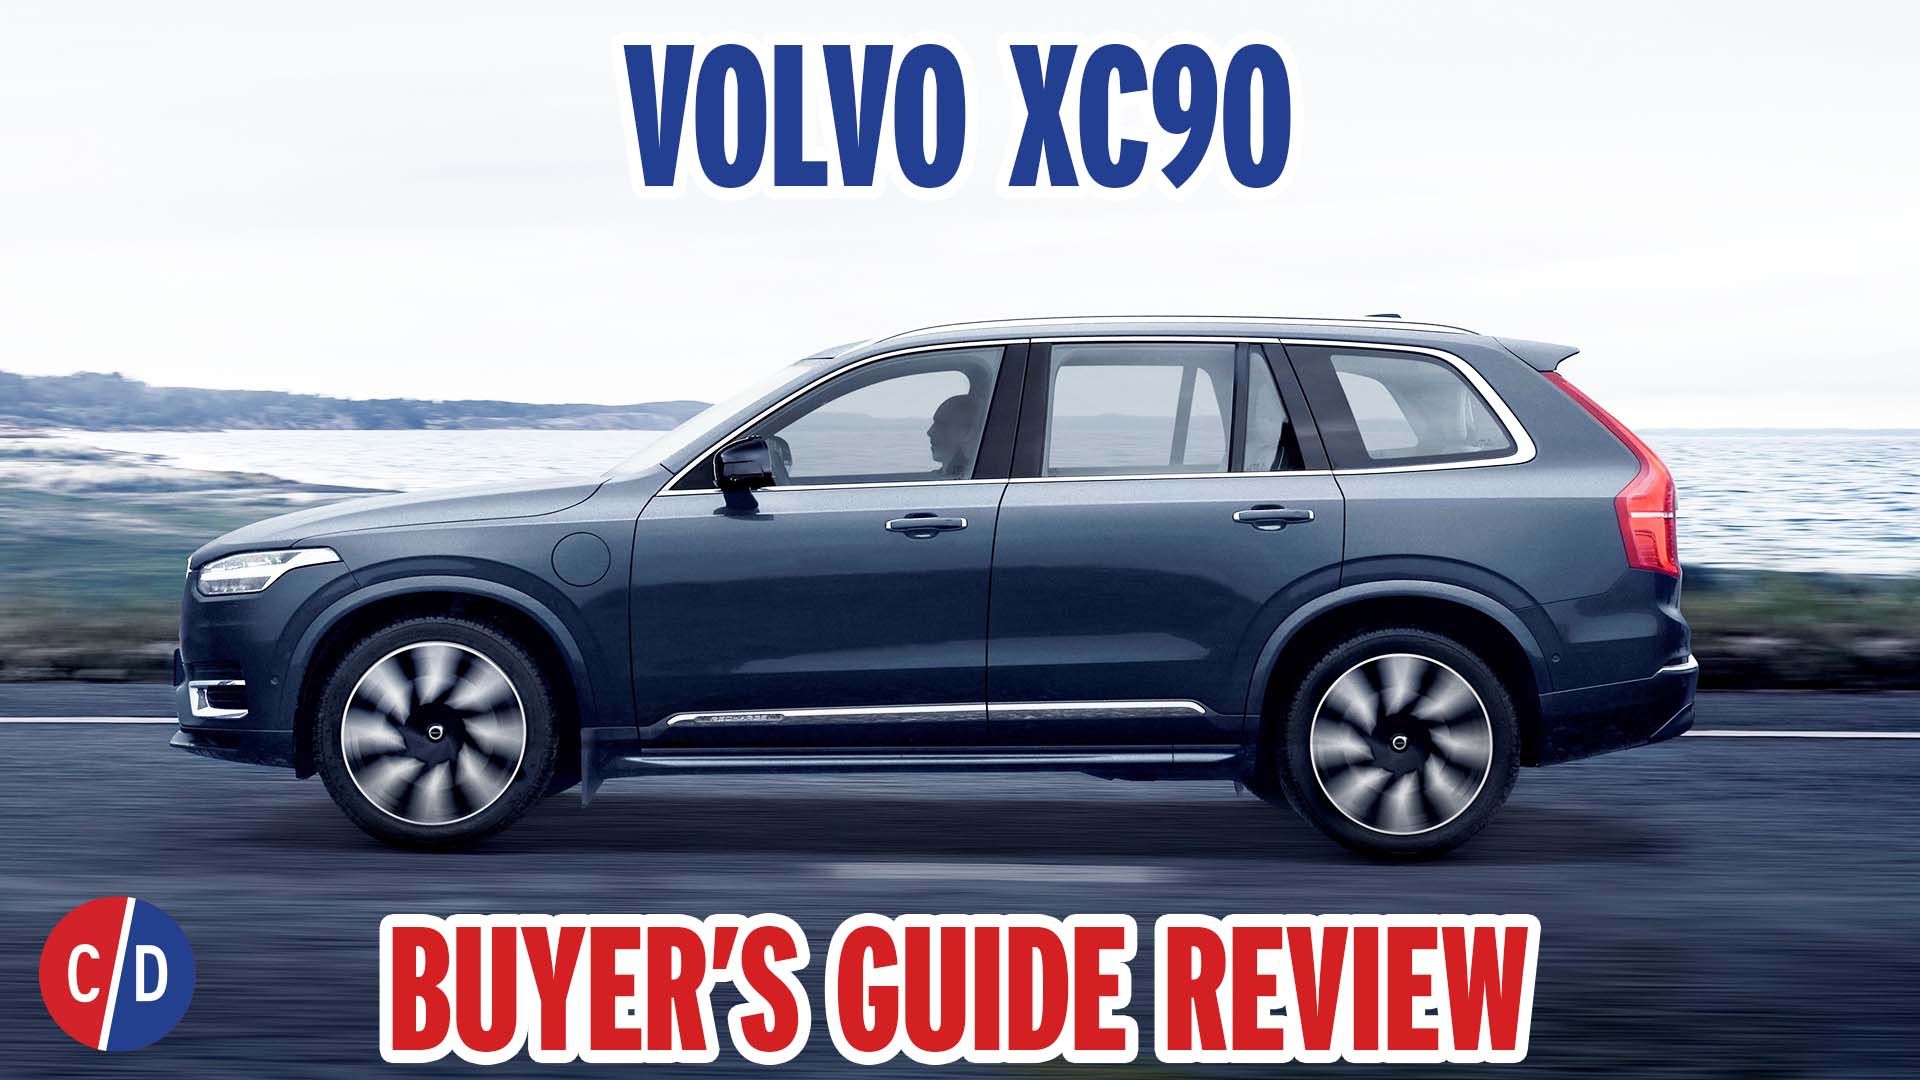 Volvo's New XC90 Excellence: $106,000 of Vroom